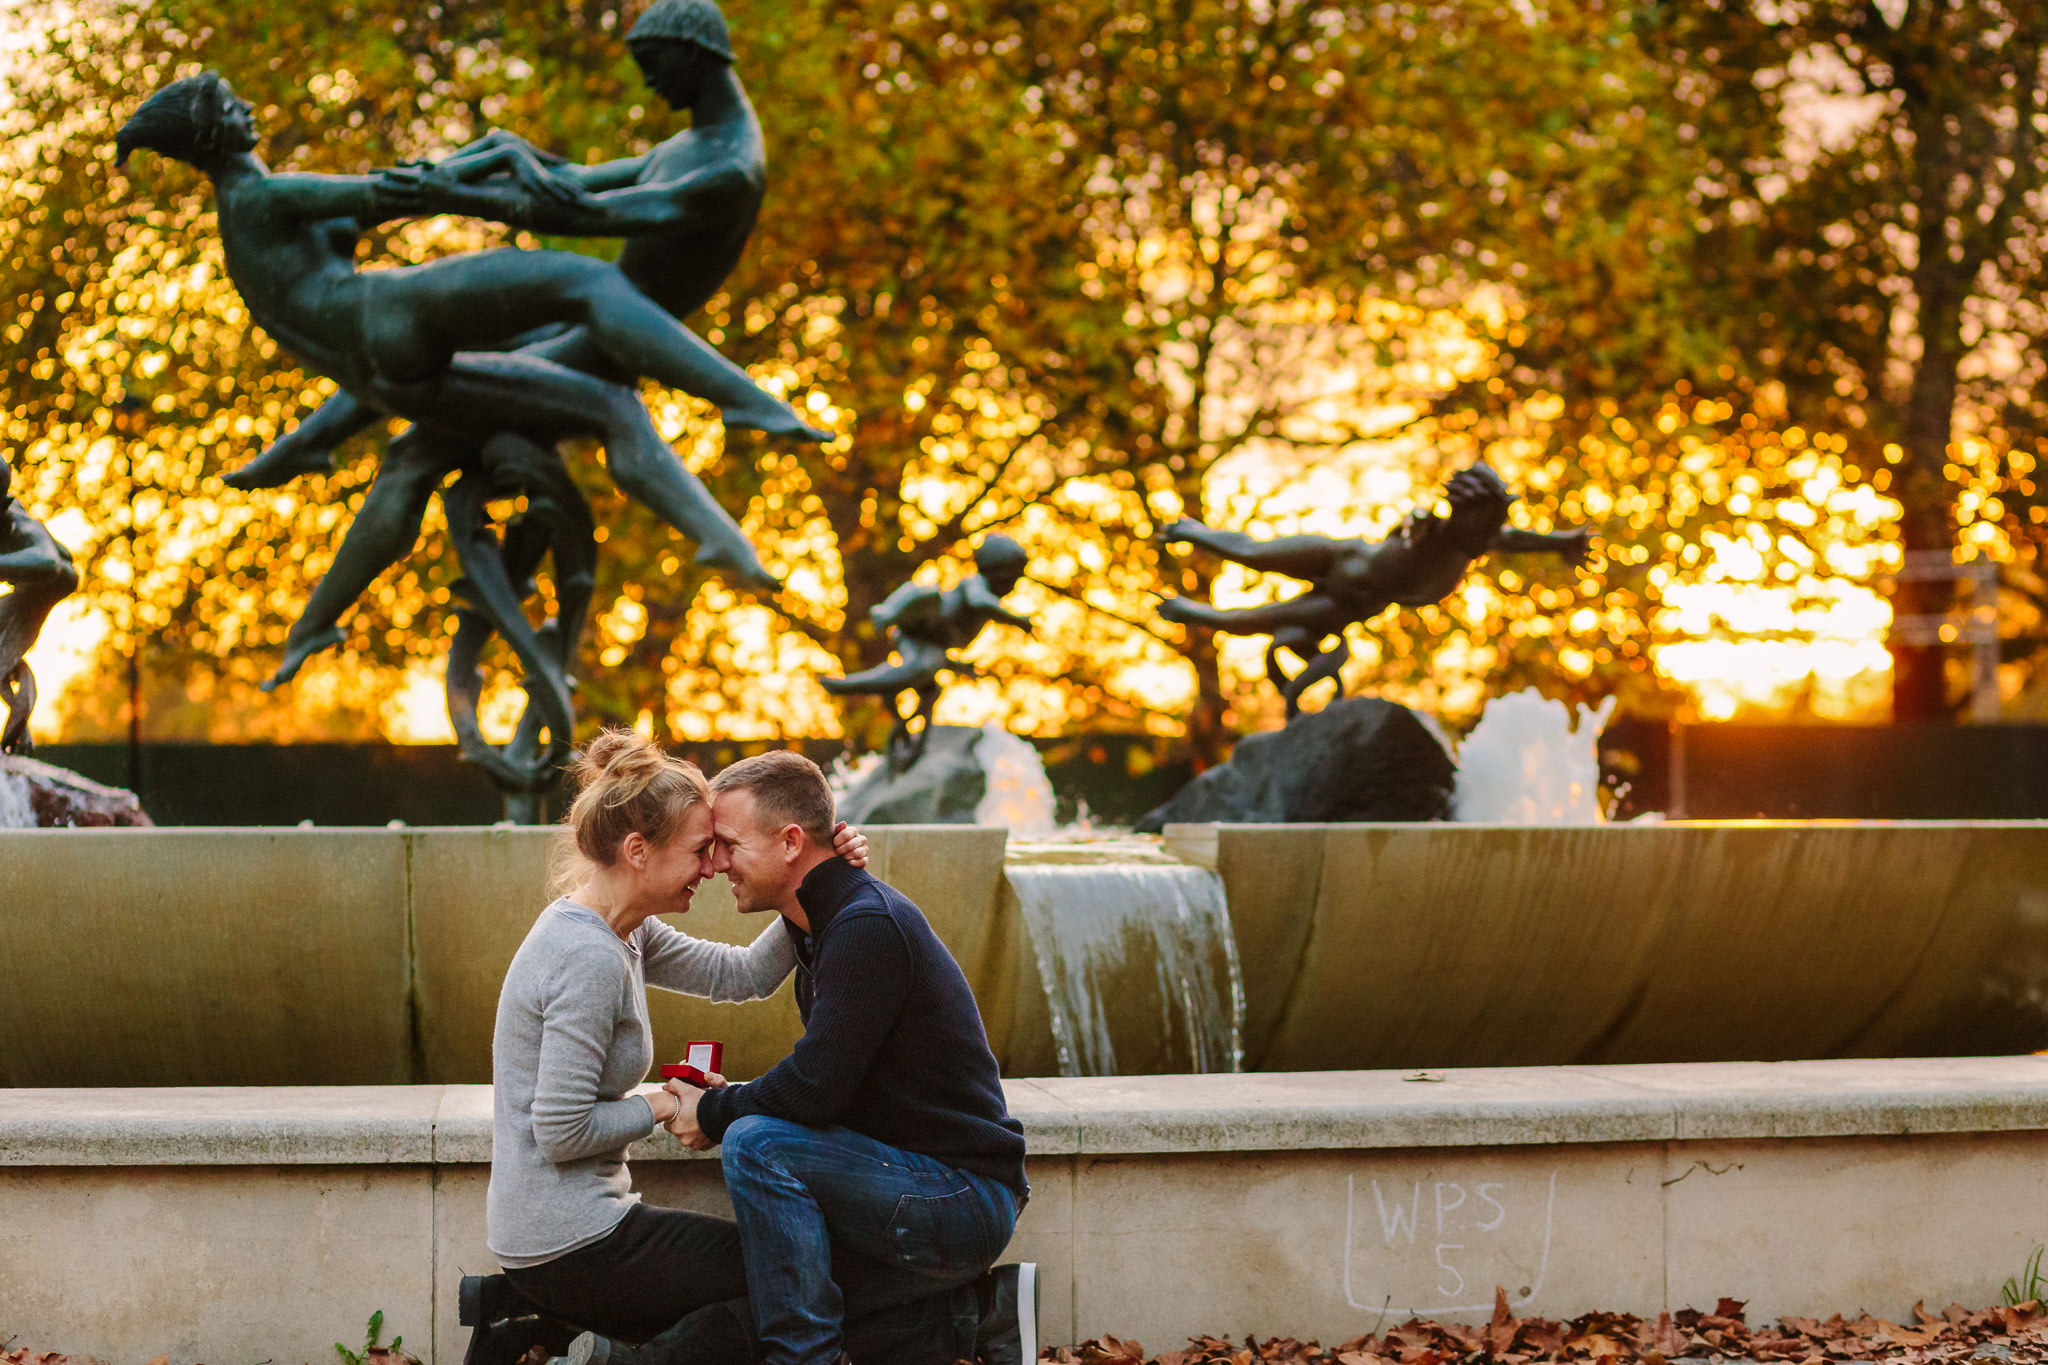 Couple enjoying the moment just after the engagement proposal in front of Joy of Life Fountain in Hyde Park